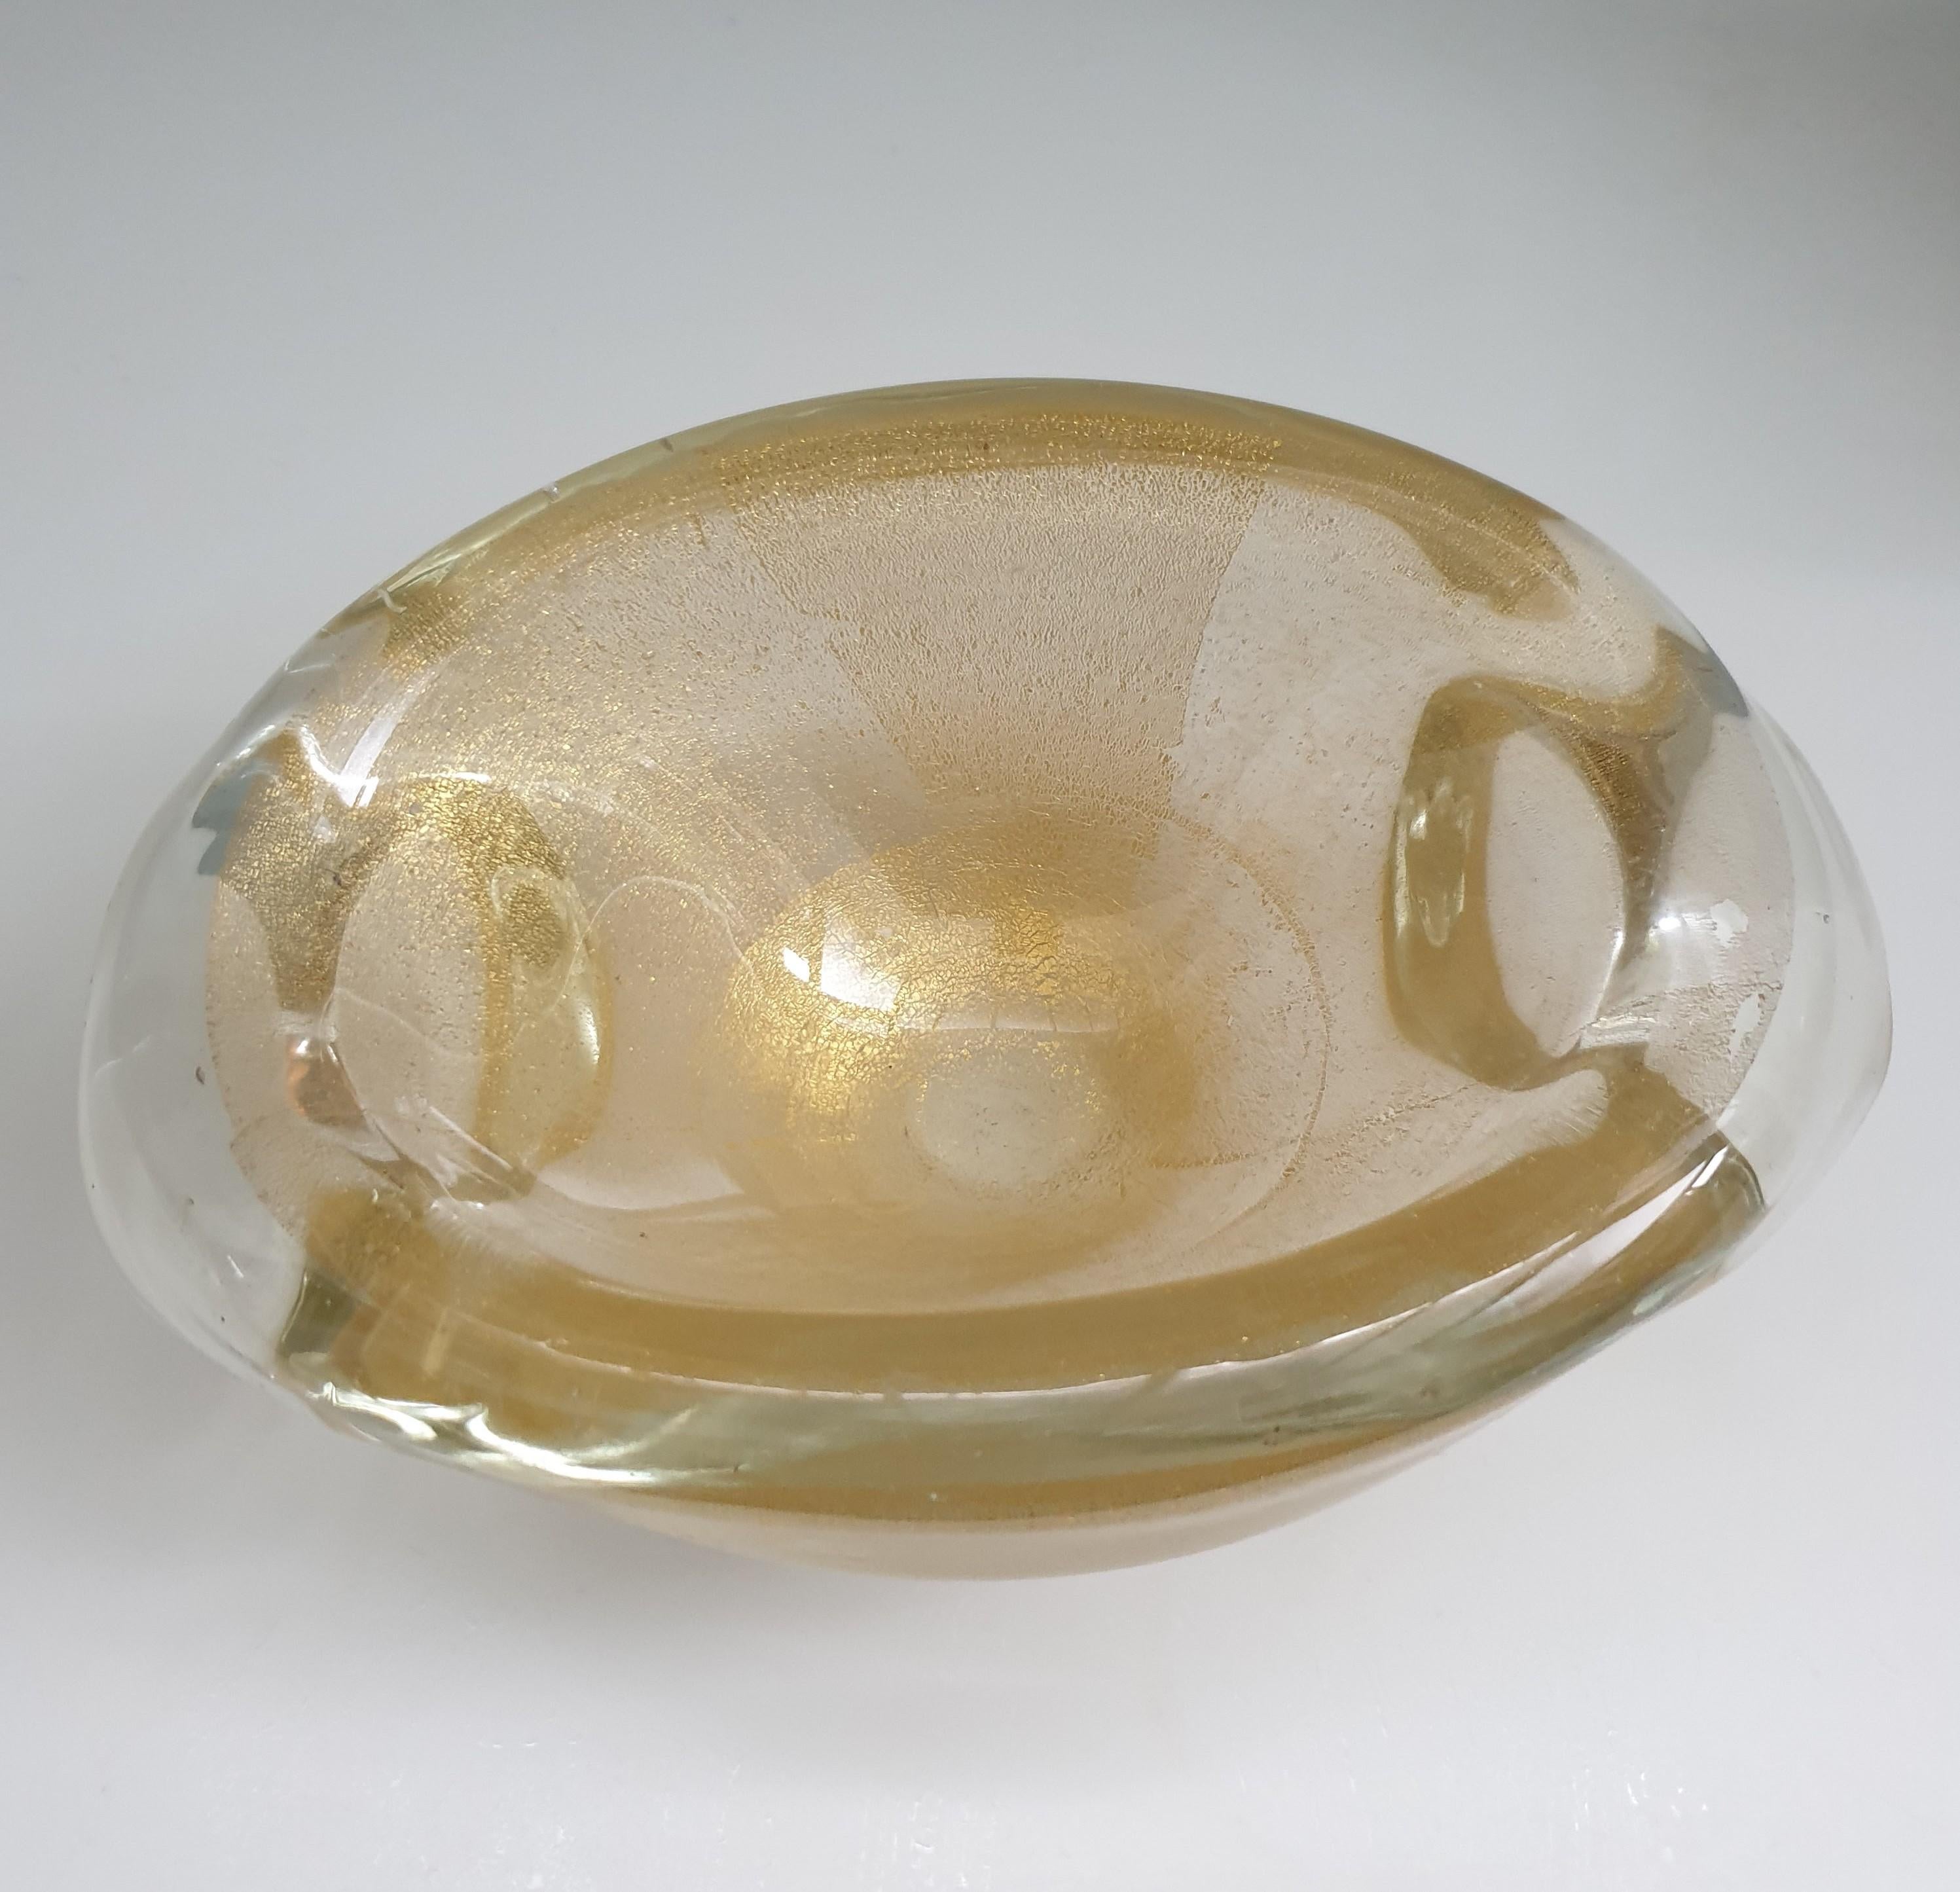 Beautiful vintage well sized Murano hand blown glass bowl. The bowl is fashioned using the famous Sommerso technique, creating clear bubbles in champagne or caramel colour with gold flecks. This is most likely the work of the famous Venini glass